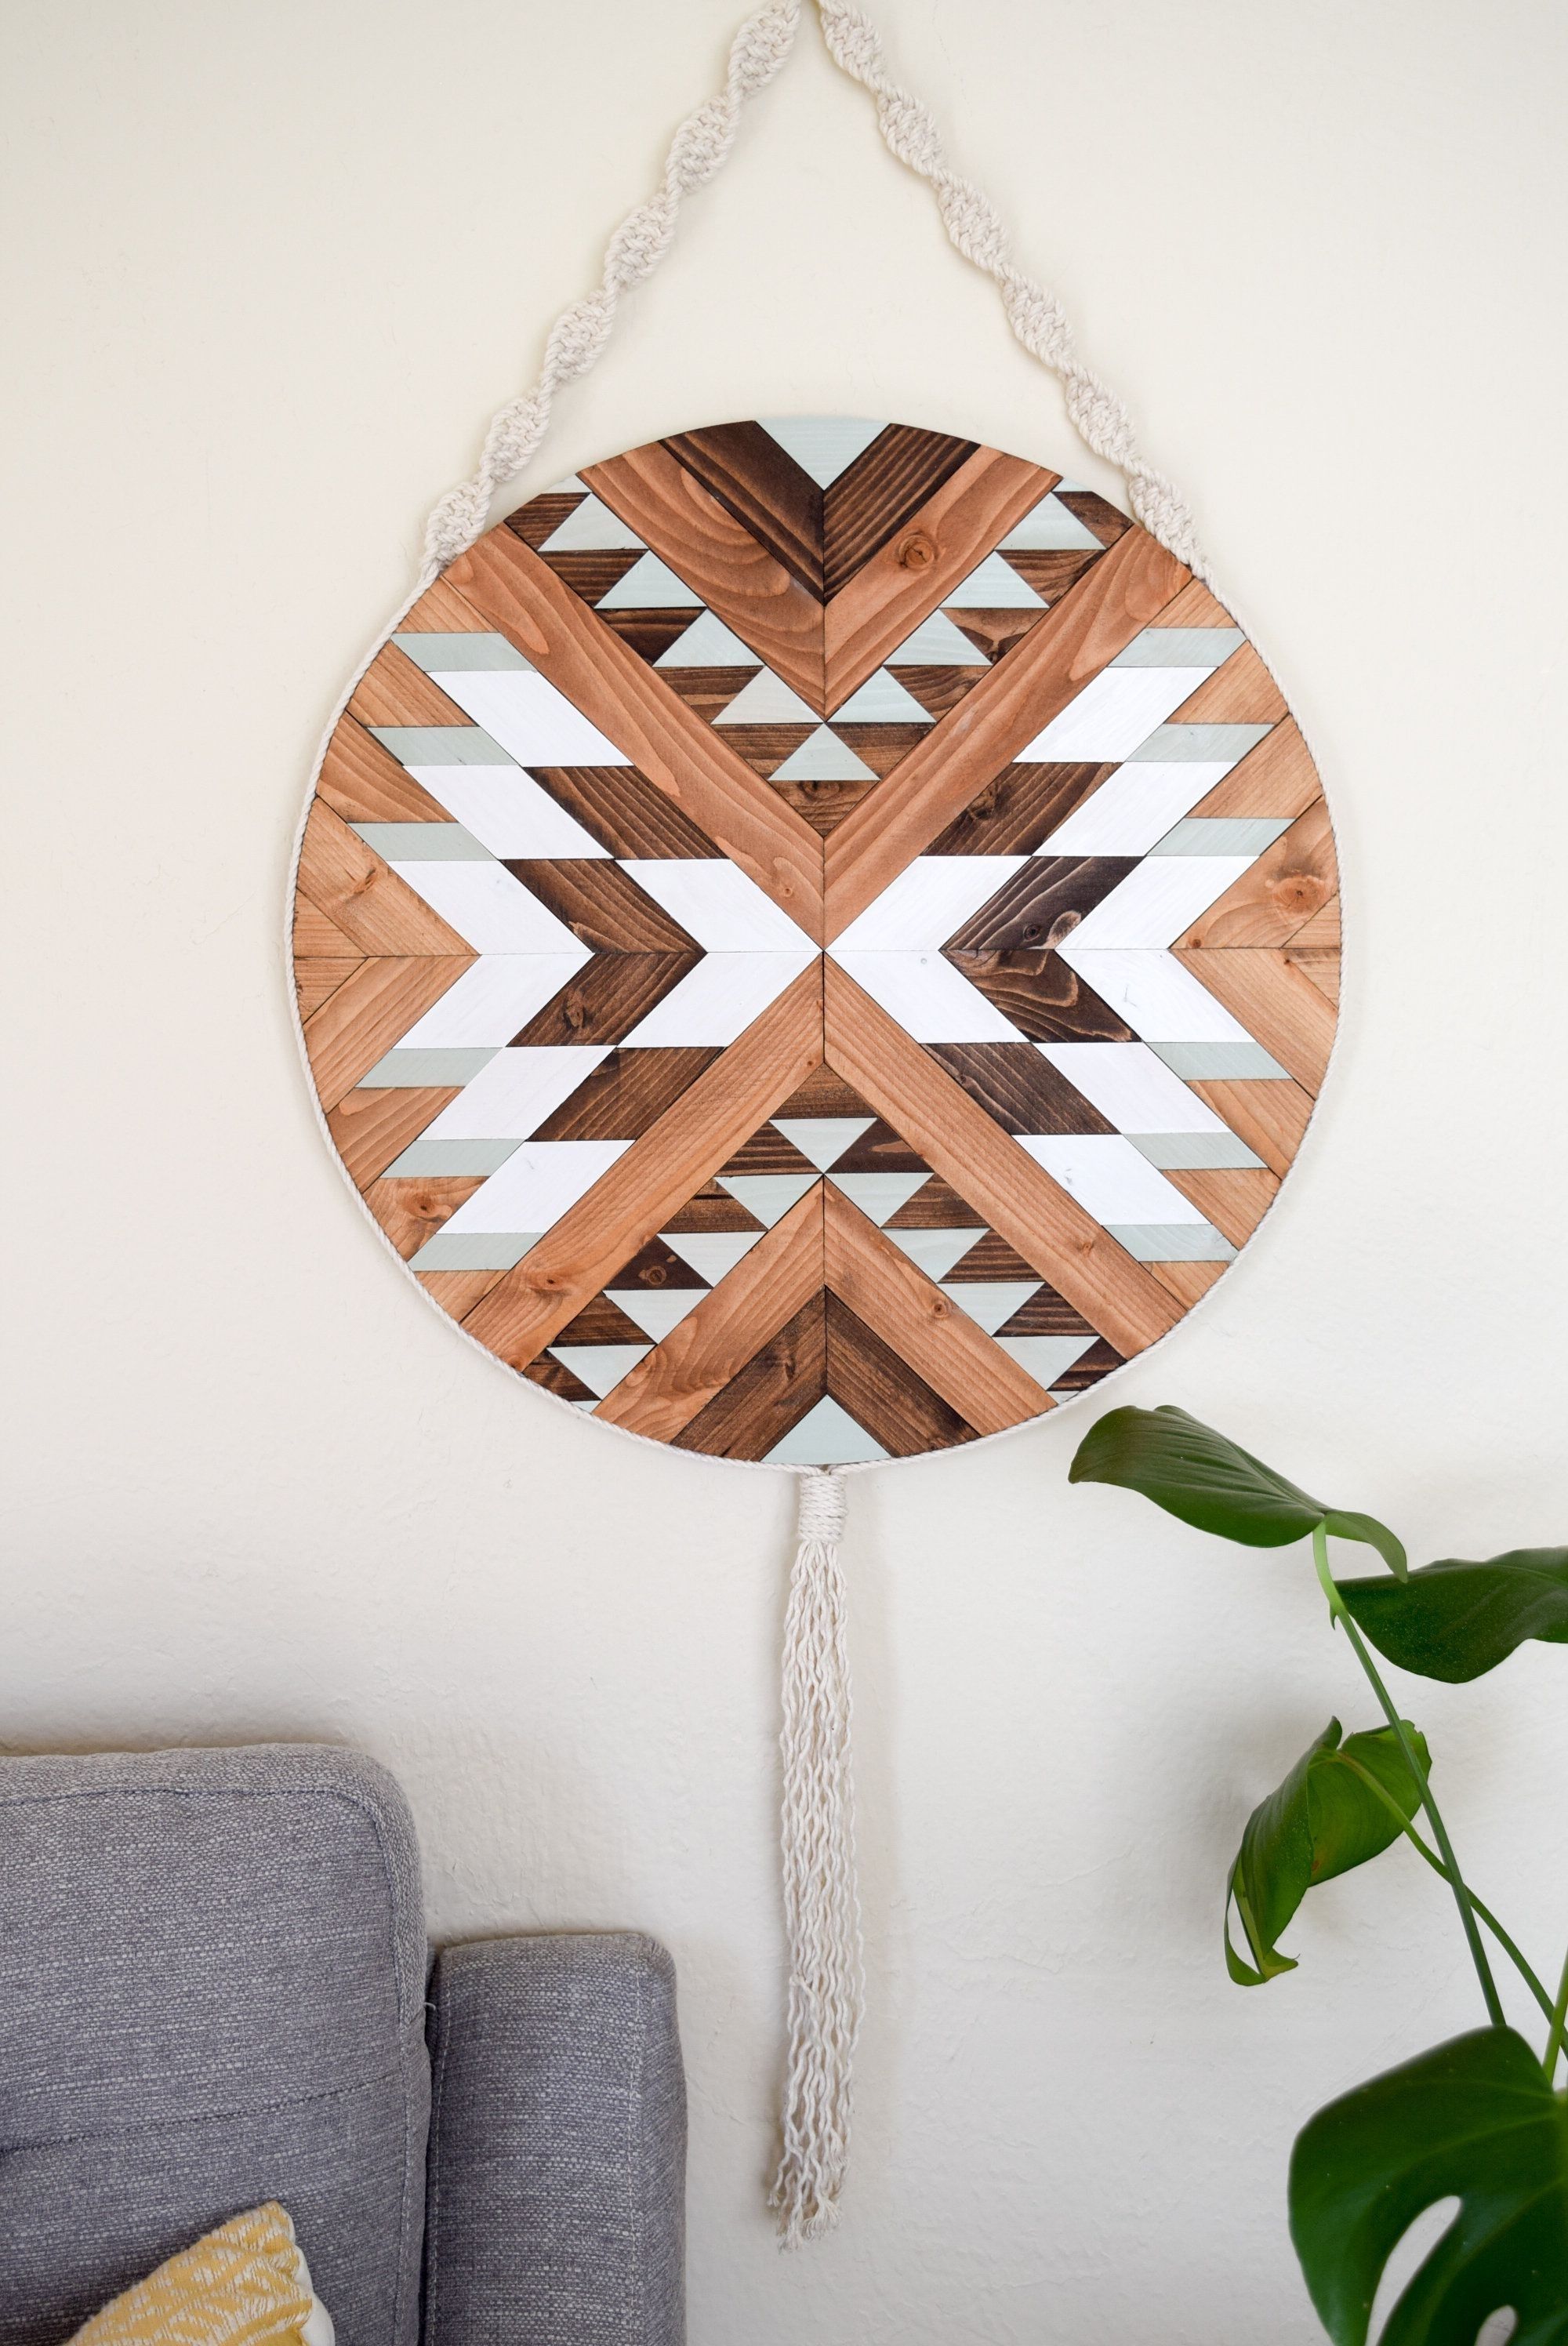 Wood Wall Art – Macrame Wall Hanging – Boho Wood Art – Round Wooden With Regard To Round Wood Wall Art (View 18 of 20)